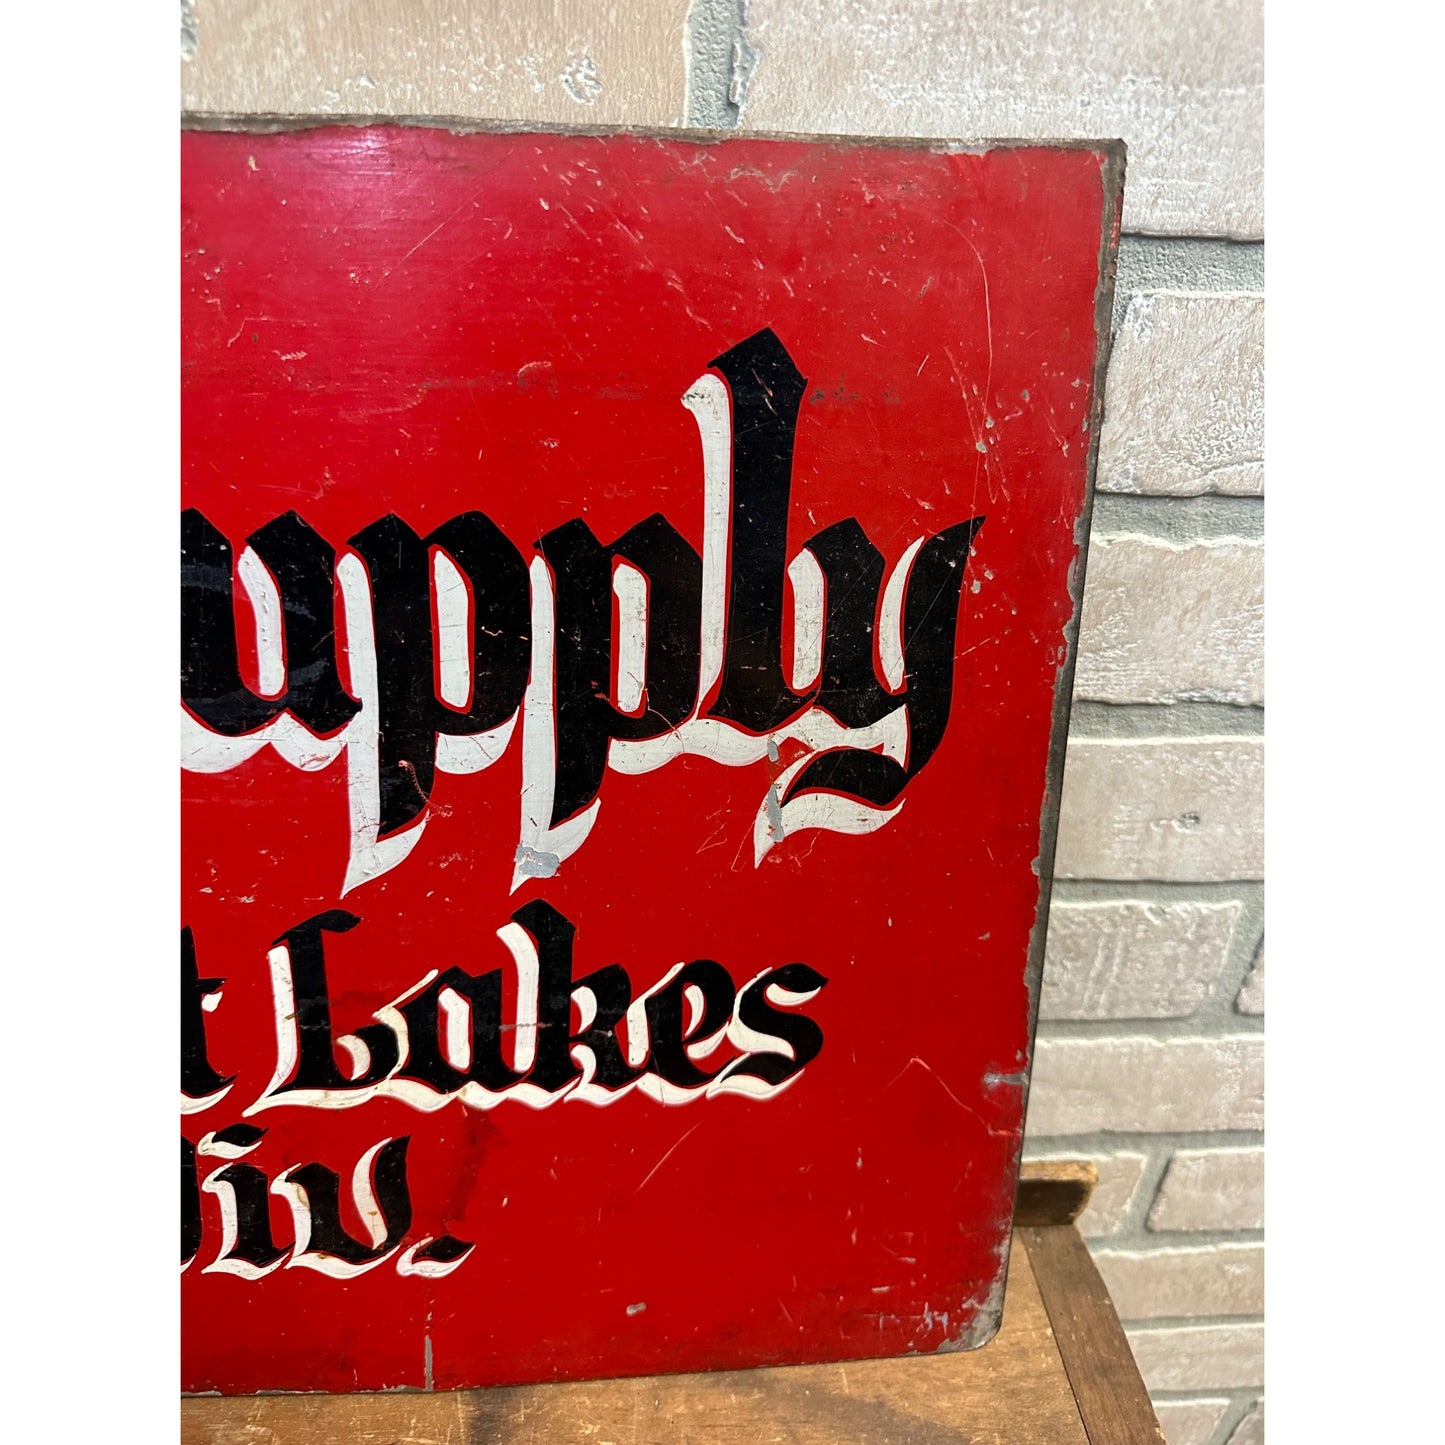 Vintage 1920s S.S. Supply Company Great Lakes Div. Advertising Metal Sign